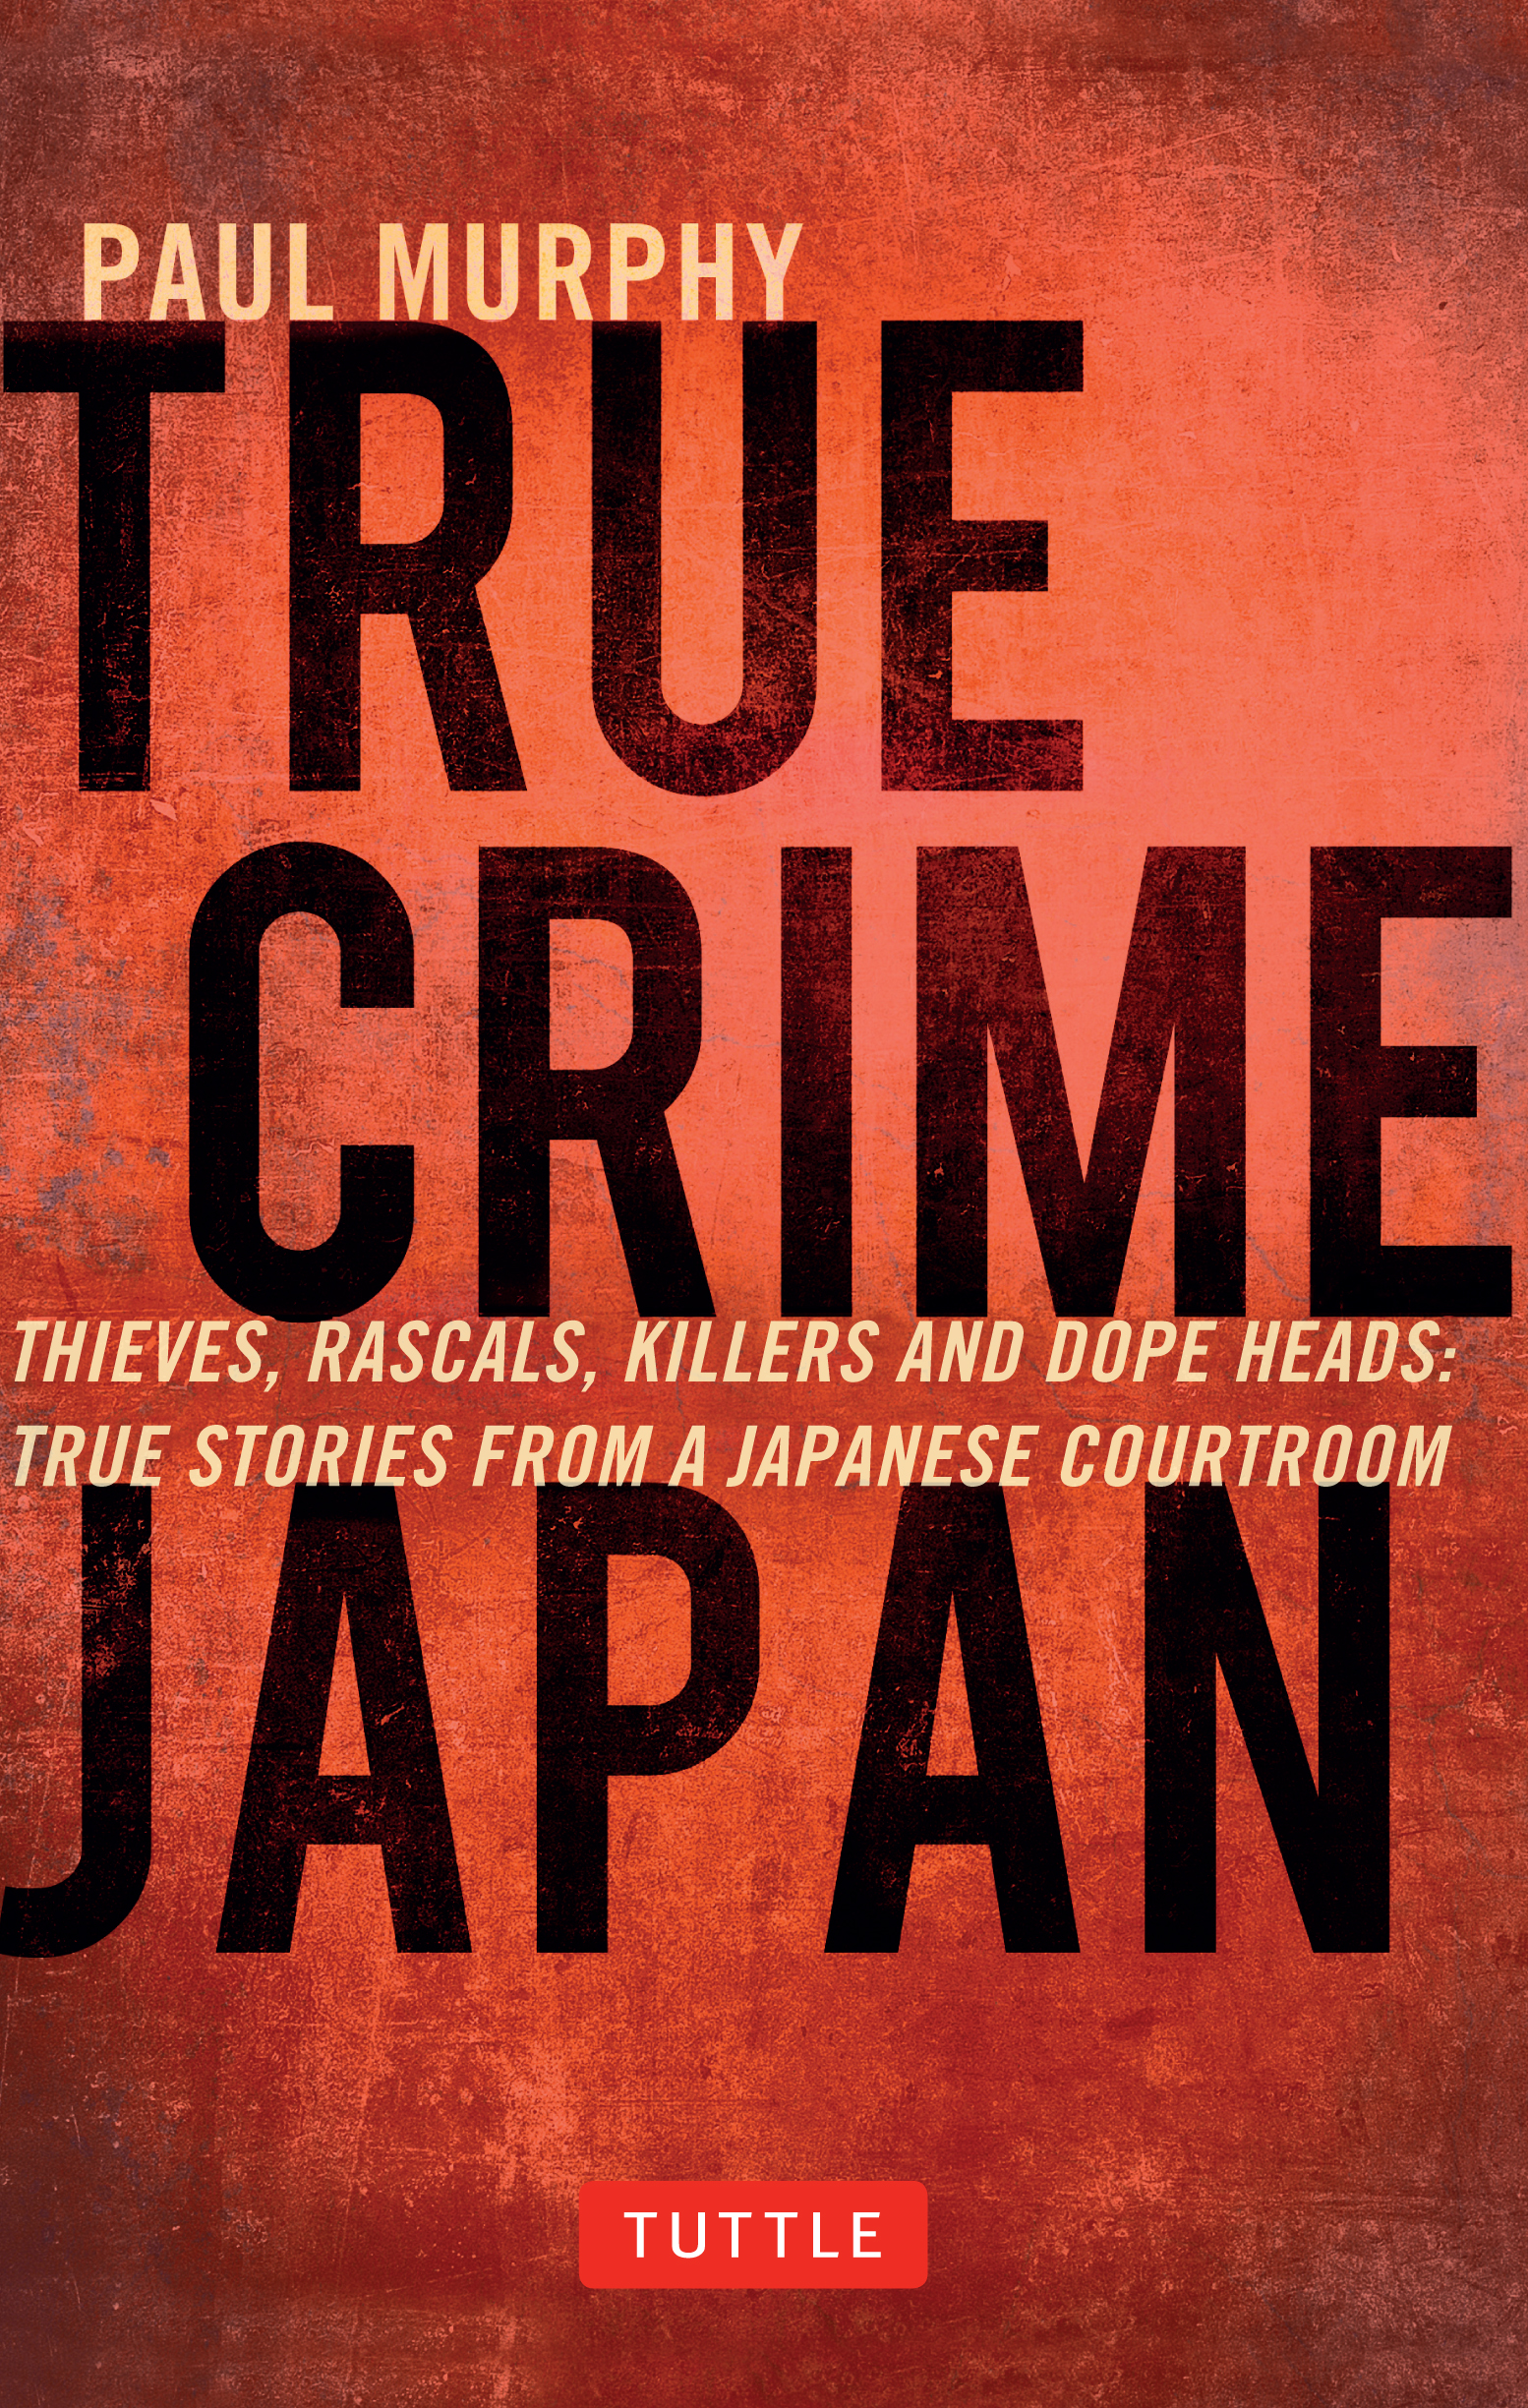 Image de couverture de True Crime Japan [electronic resource] : Thieves, Rascals, Killers and Dope Heads: True Stories From a Japanese Courtroom